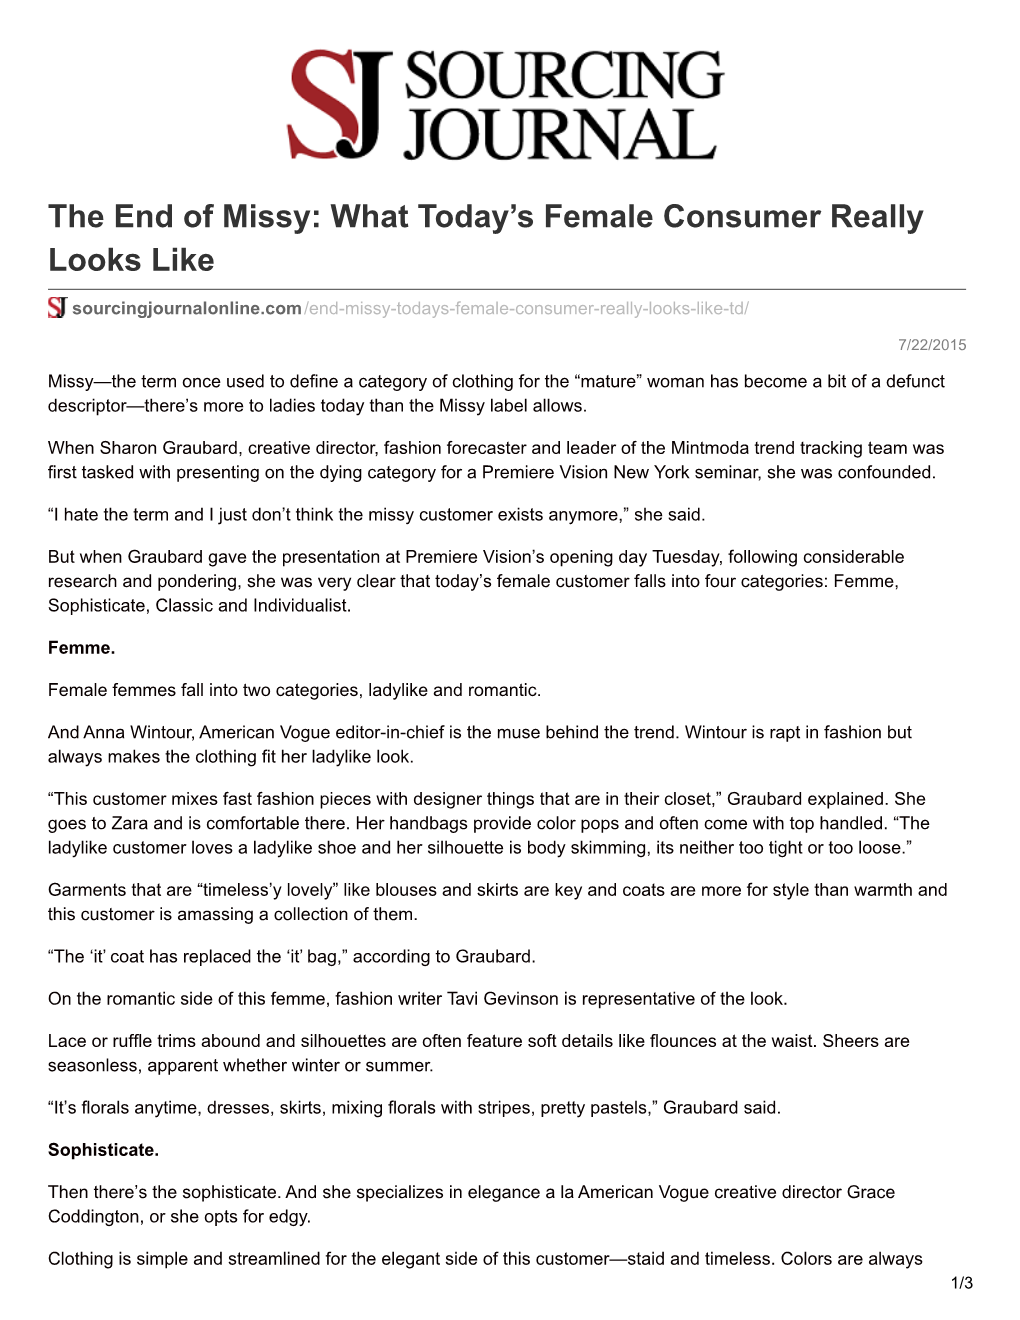 The End of Missy: What Today's Female Consumer